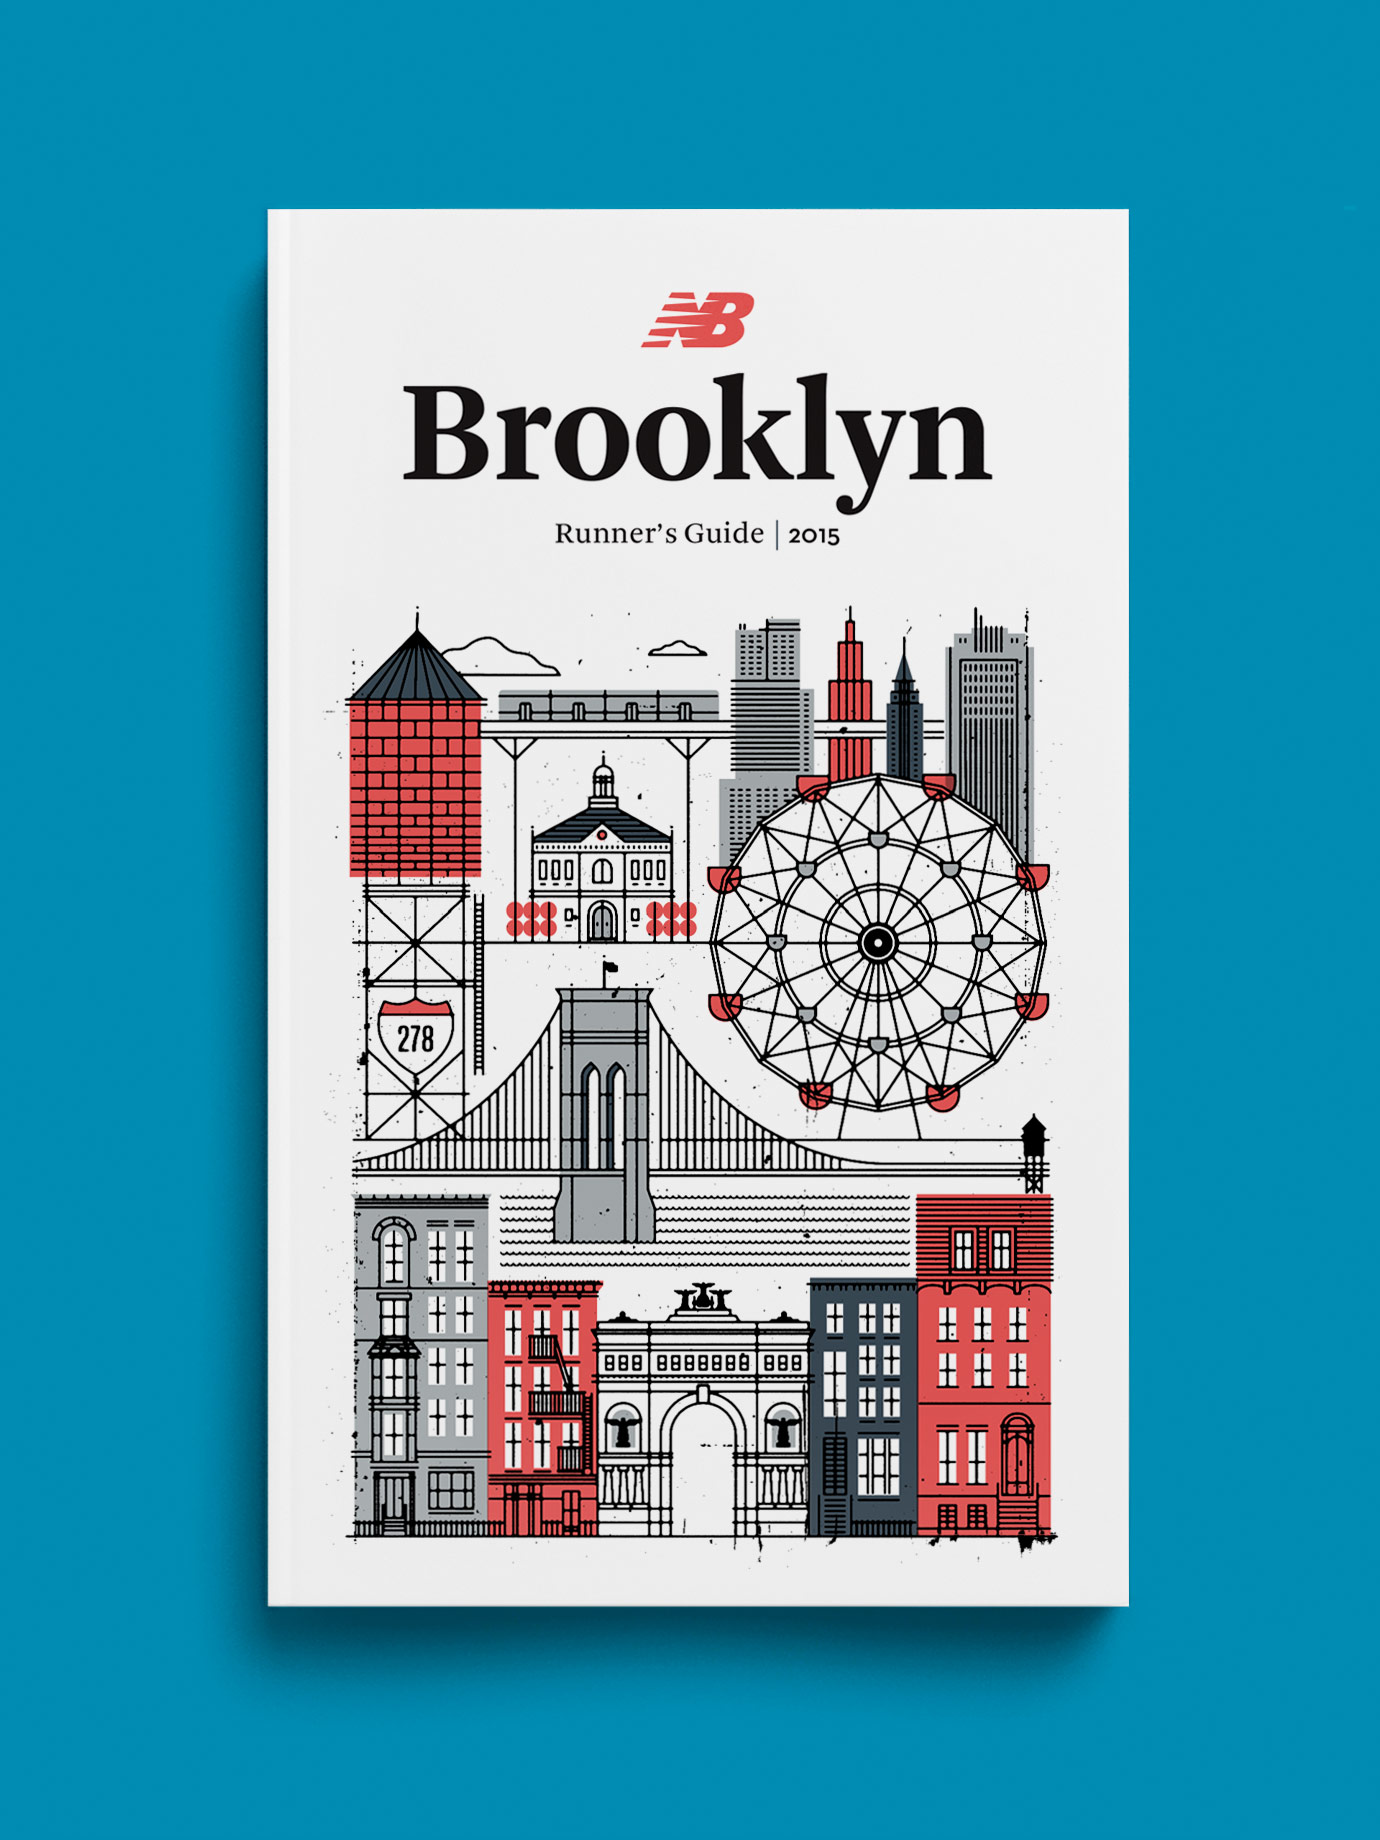 Runnners’ guidebook of Brooklyn for New Balance